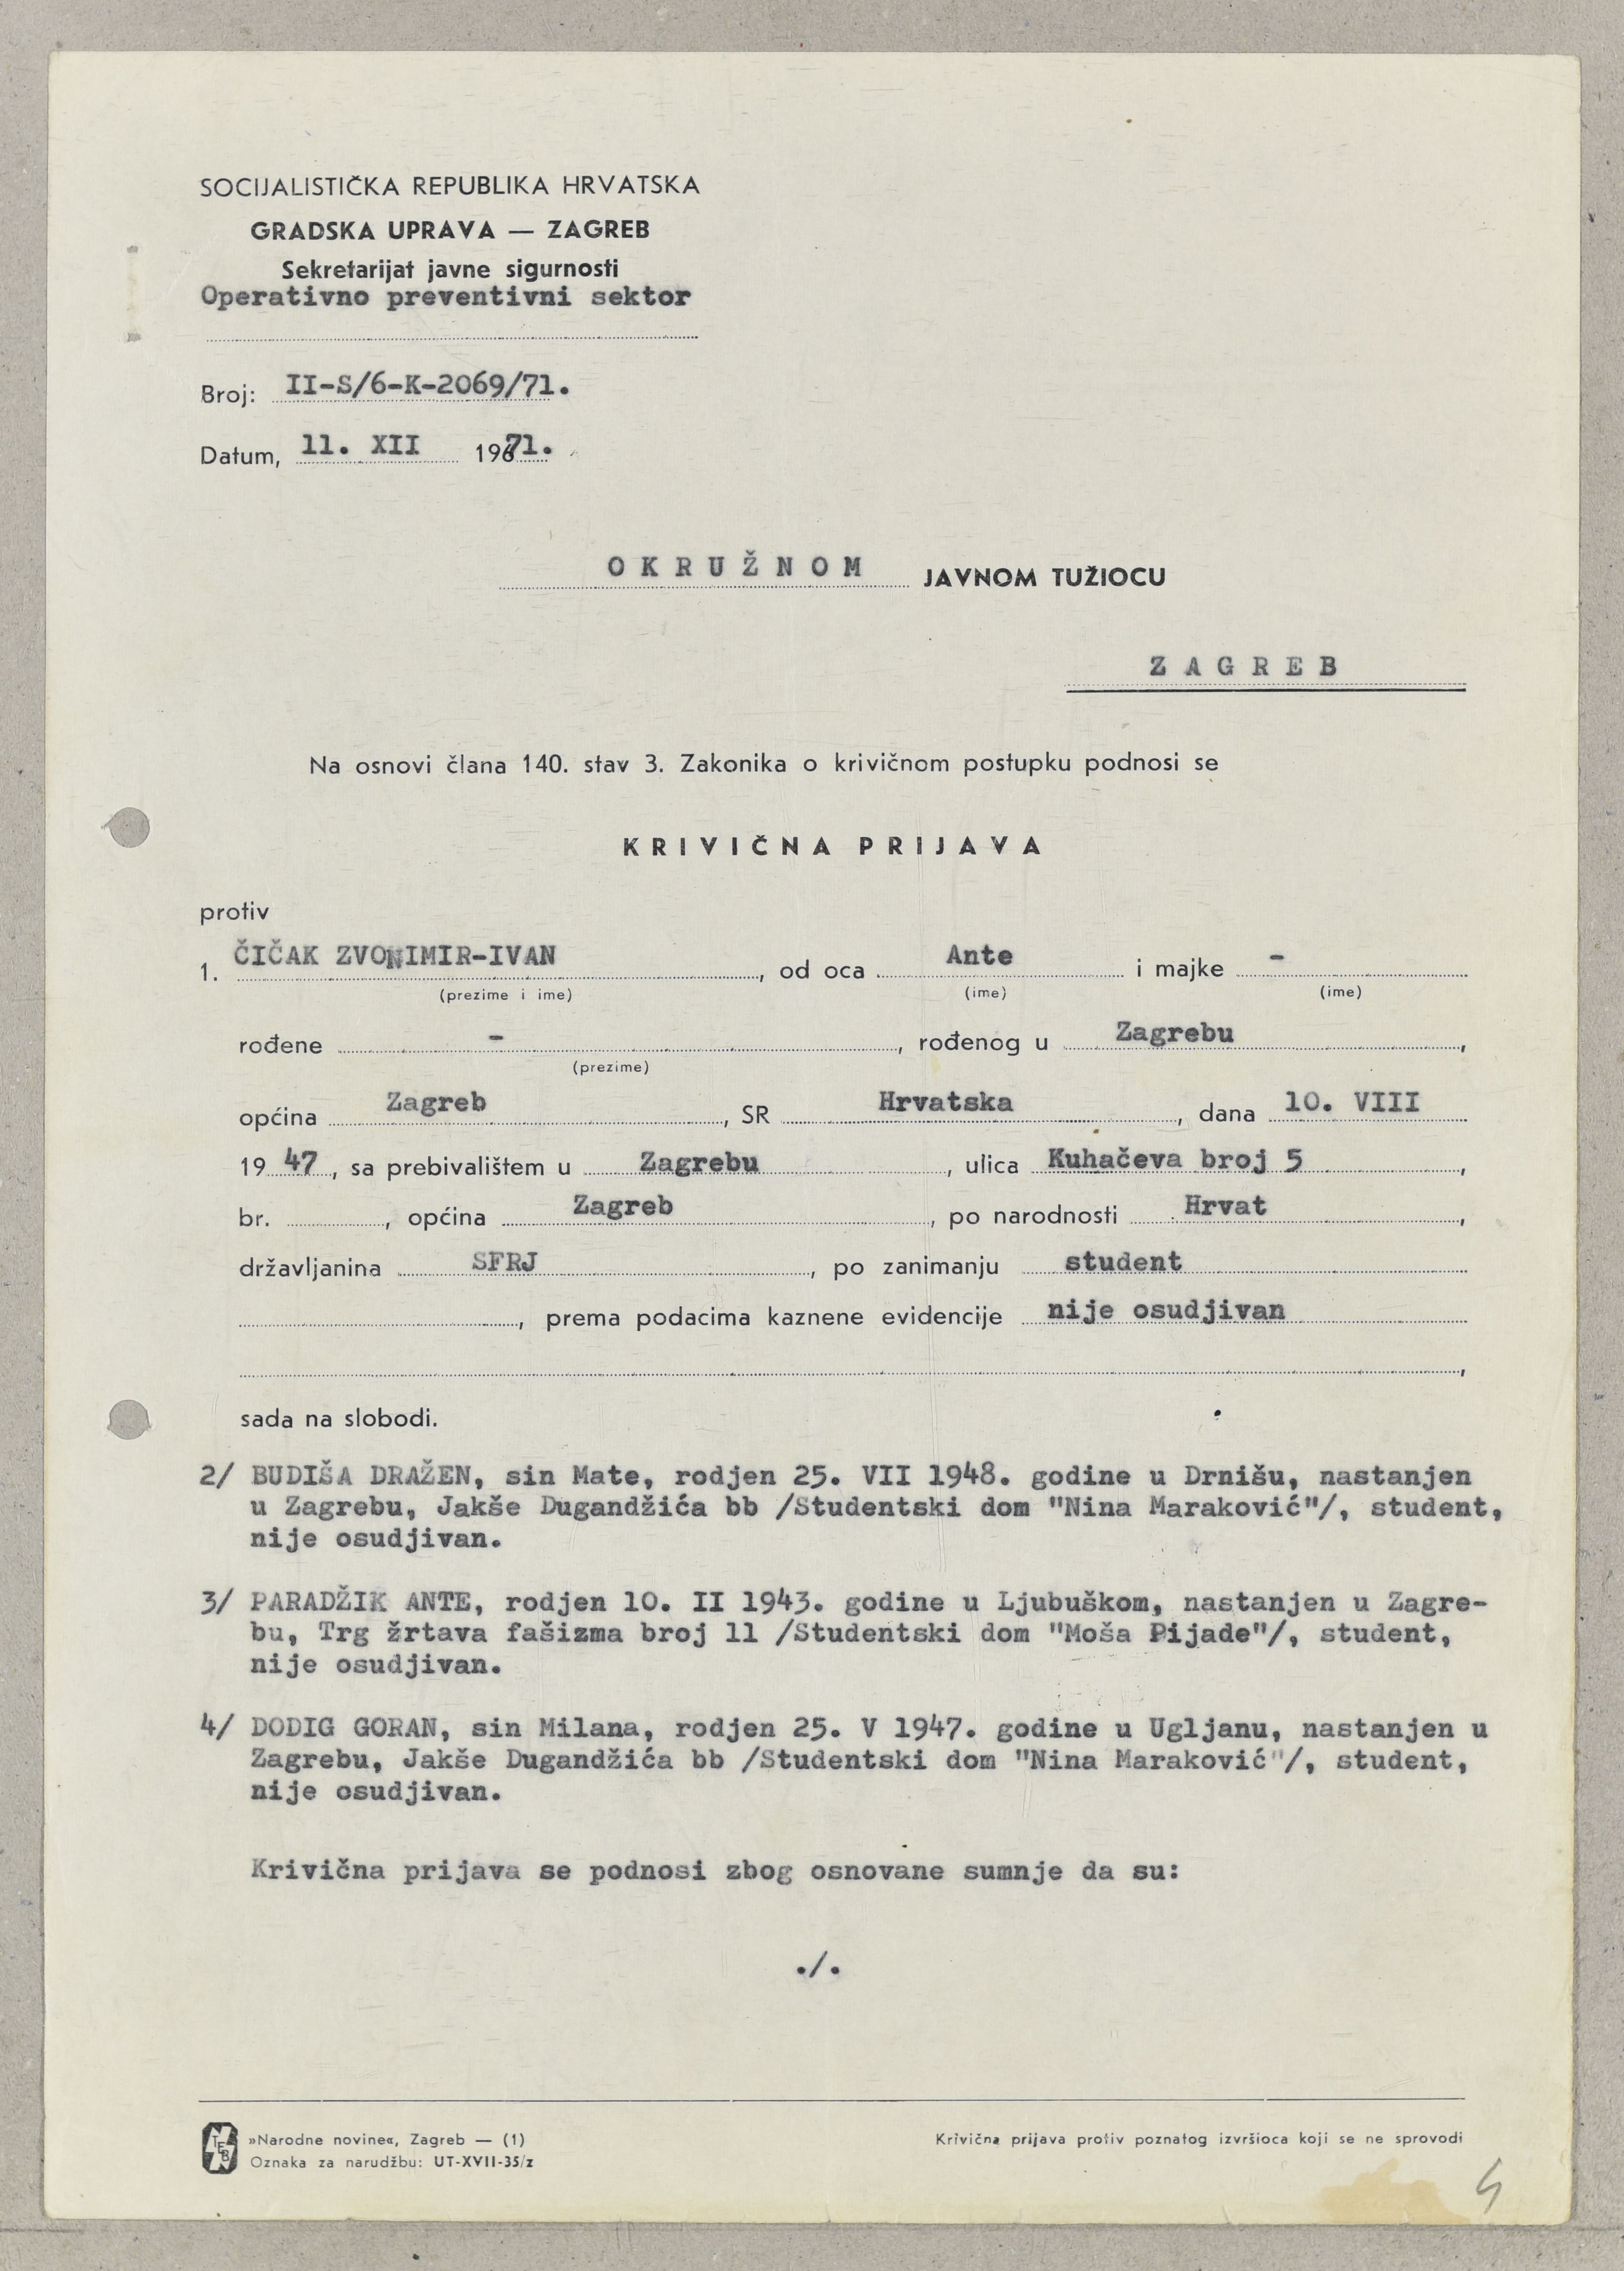 Copy of a criminal indictment against student leaders. 11 December 1971. Archival document